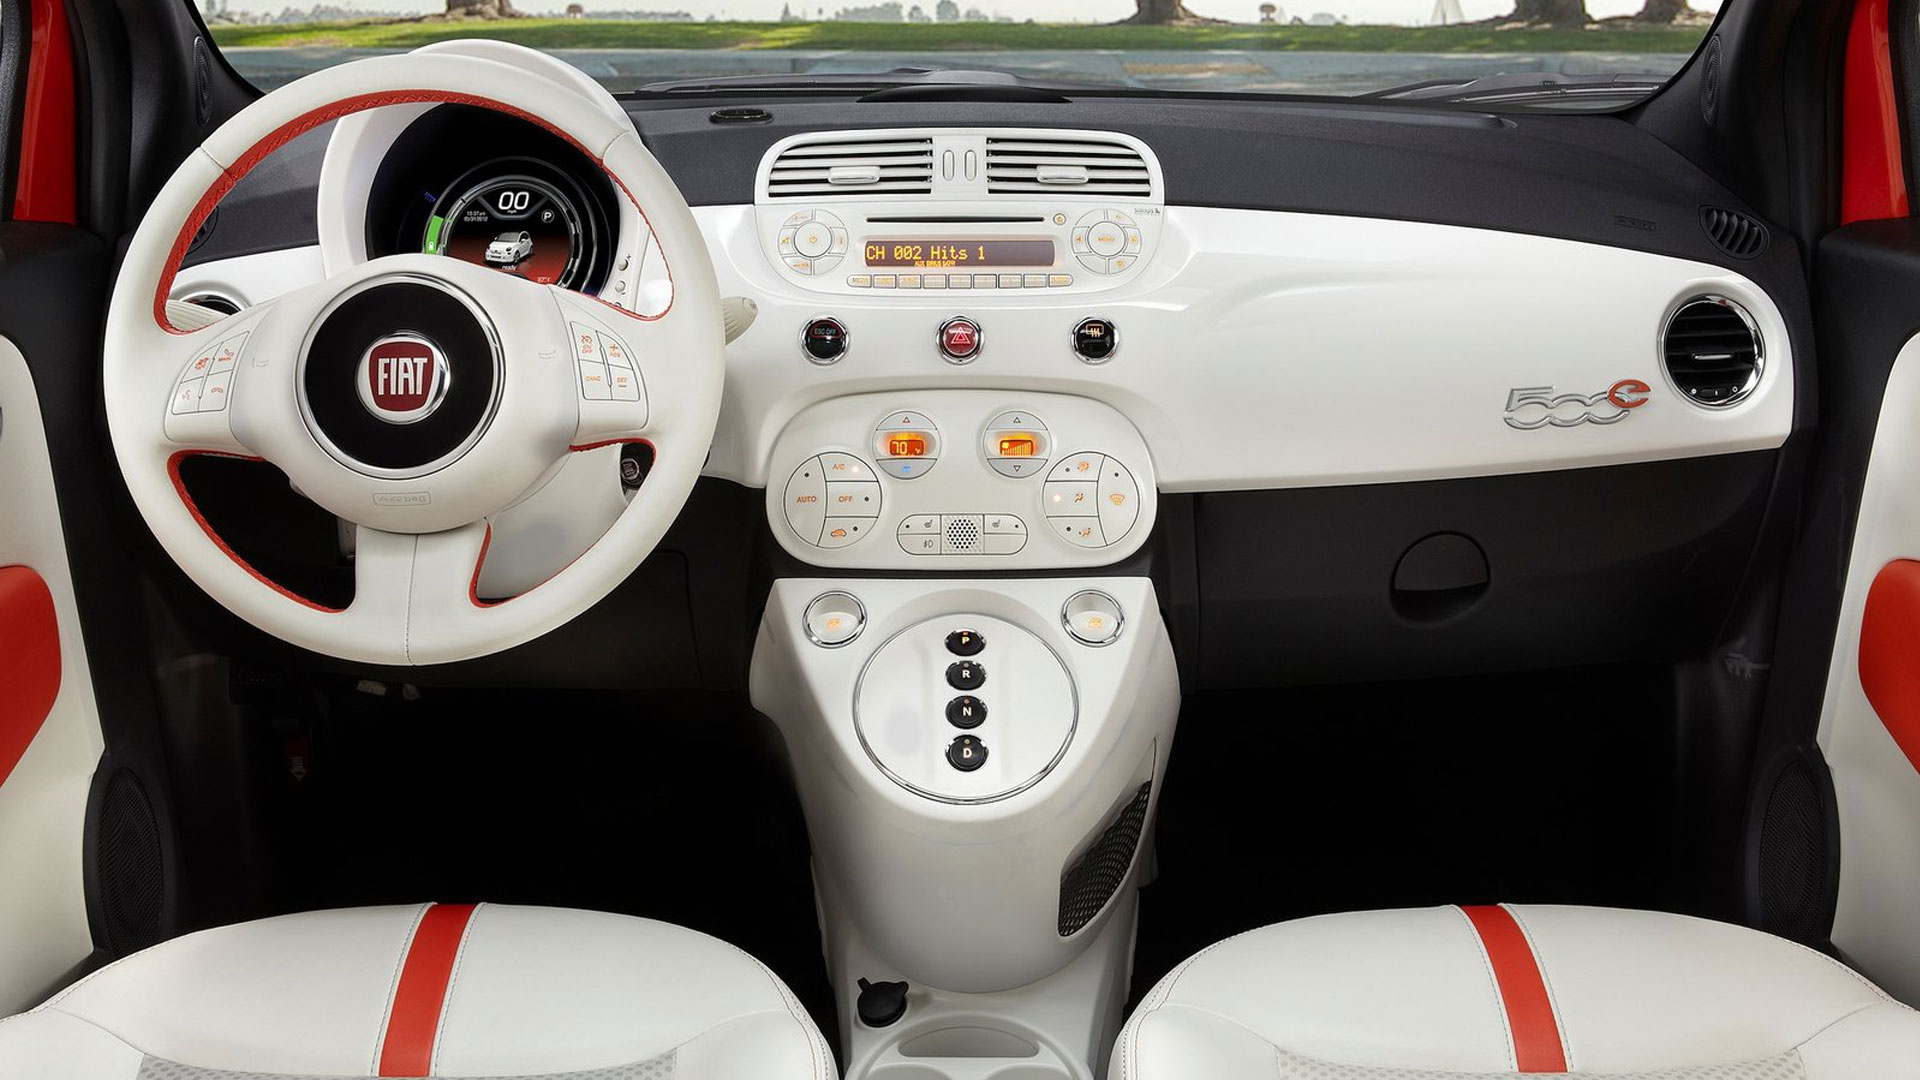 Fiat 500E, Car information, Photos and details, Neo drive experience, 1920x1080 Full HD Desktop